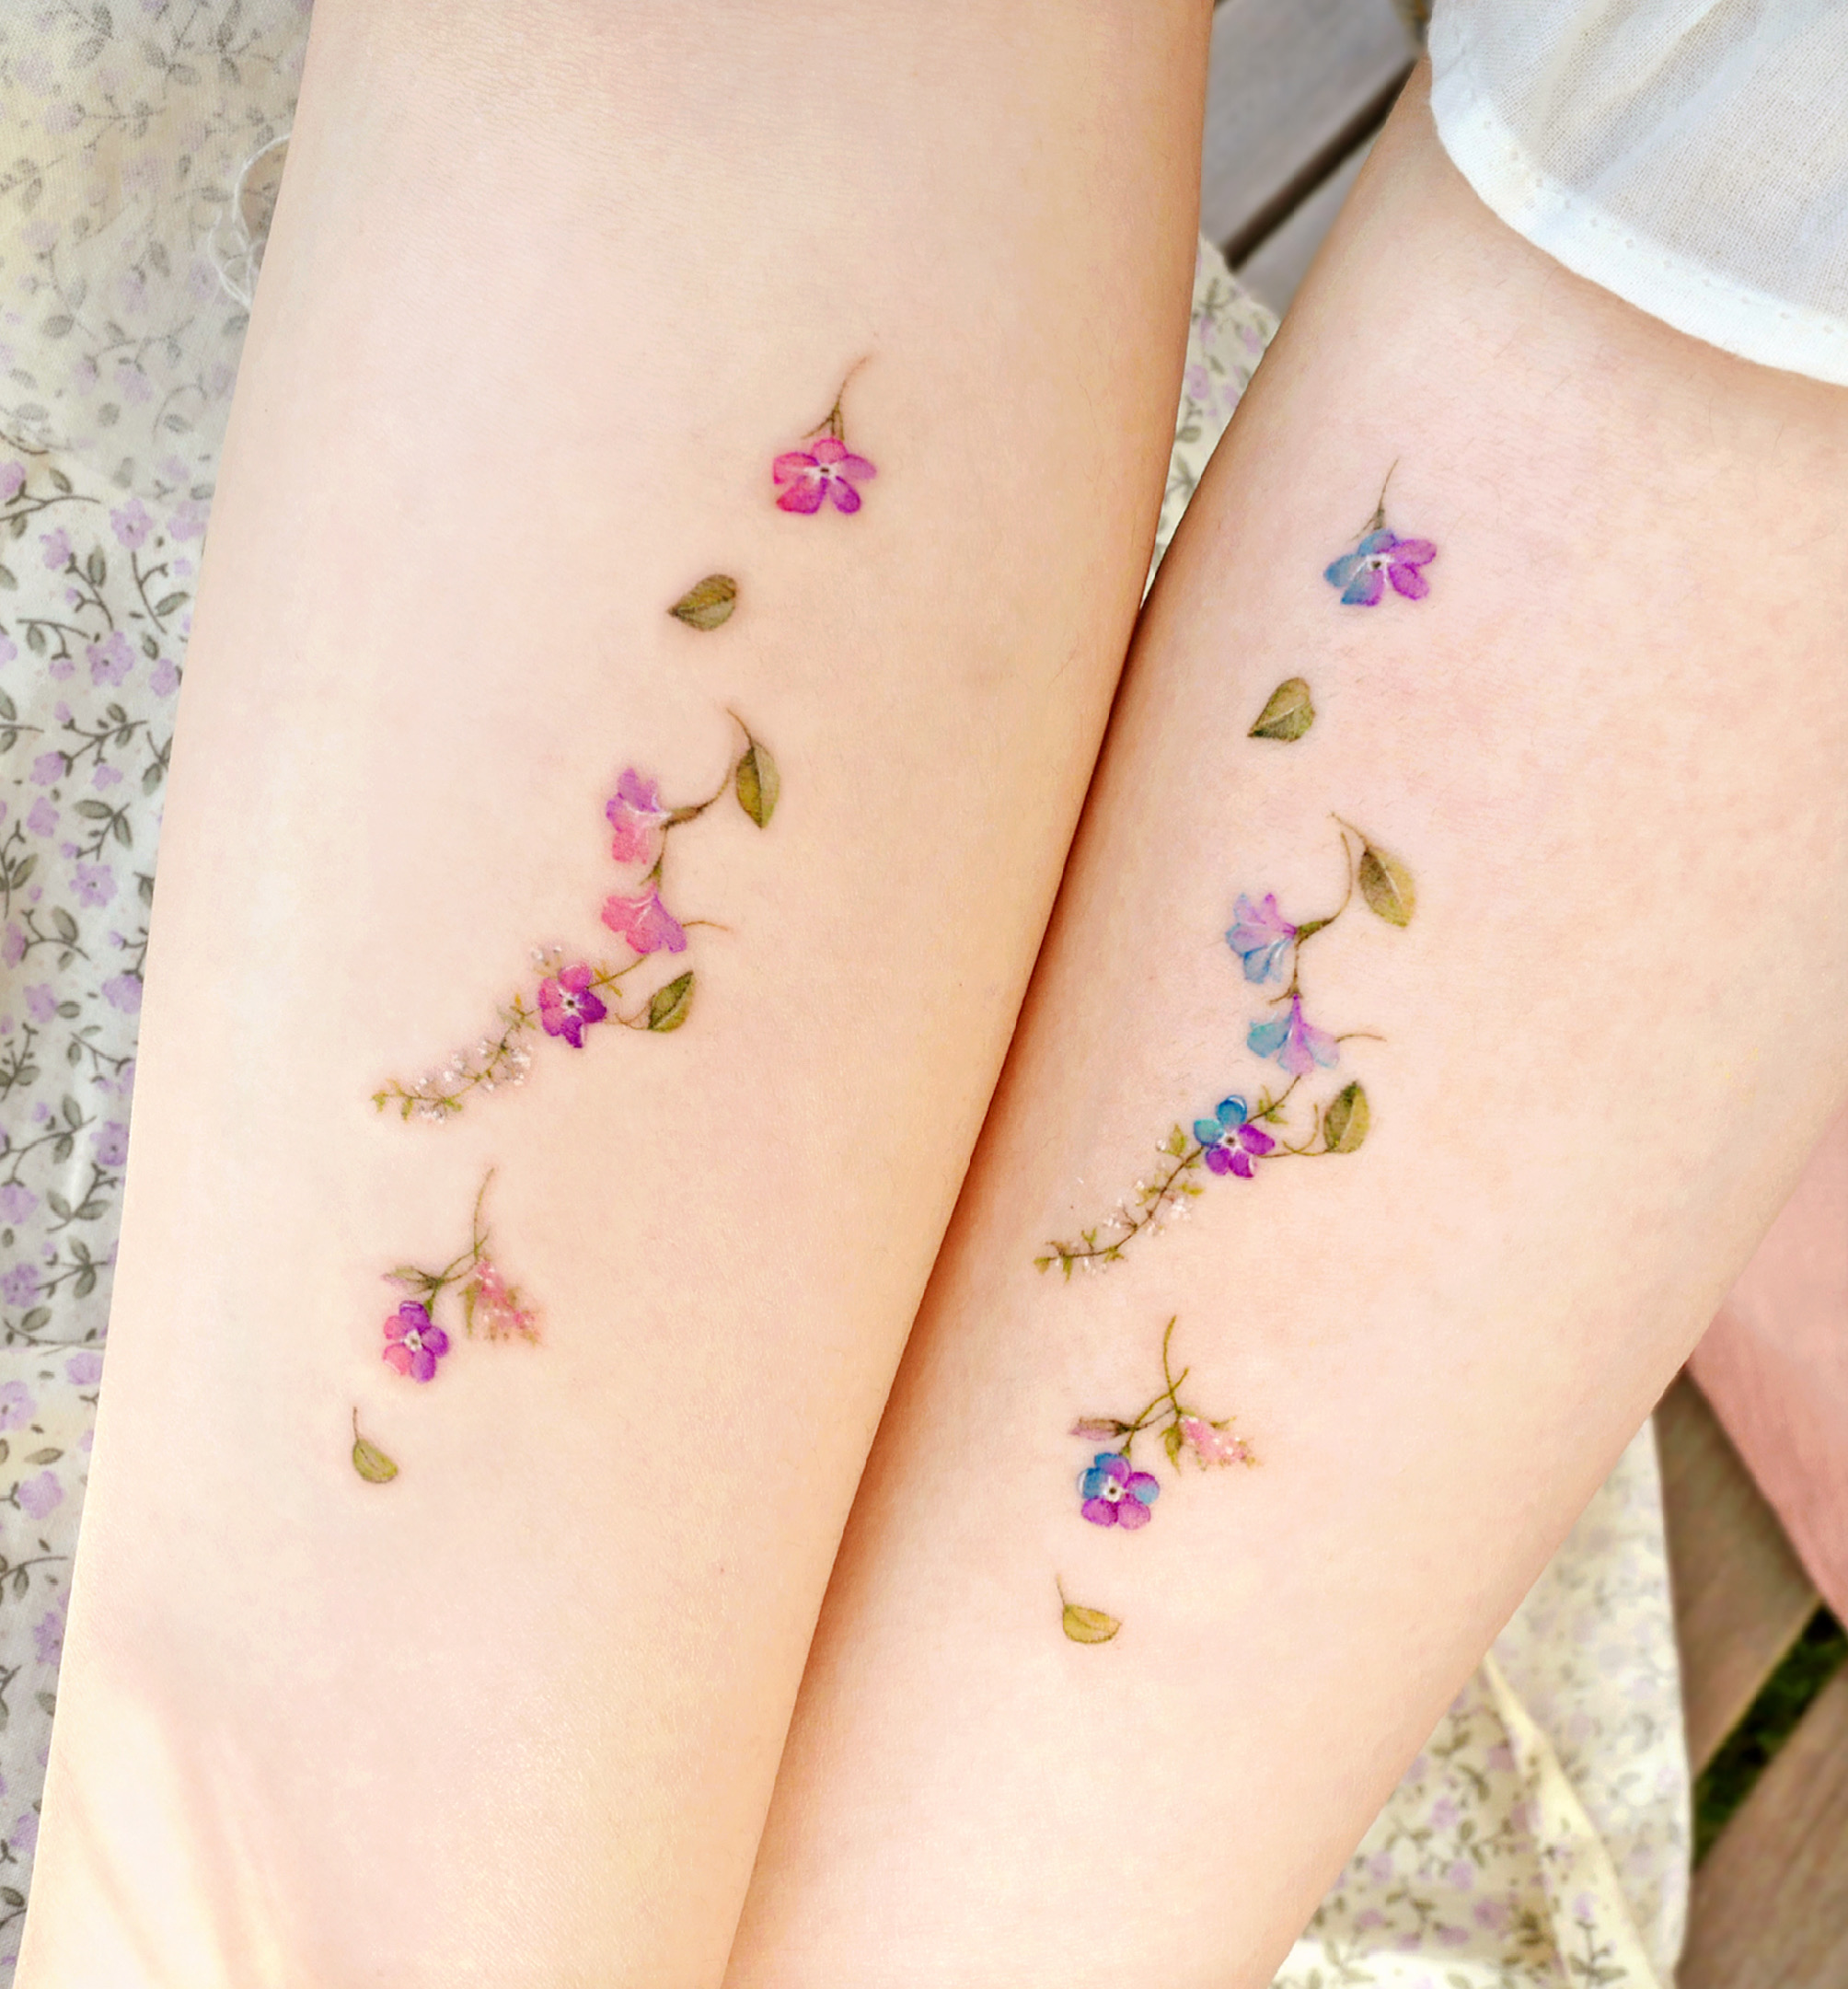 These Flower Tattoos Are a New Way to Get Floral Ink  Teen Vogue